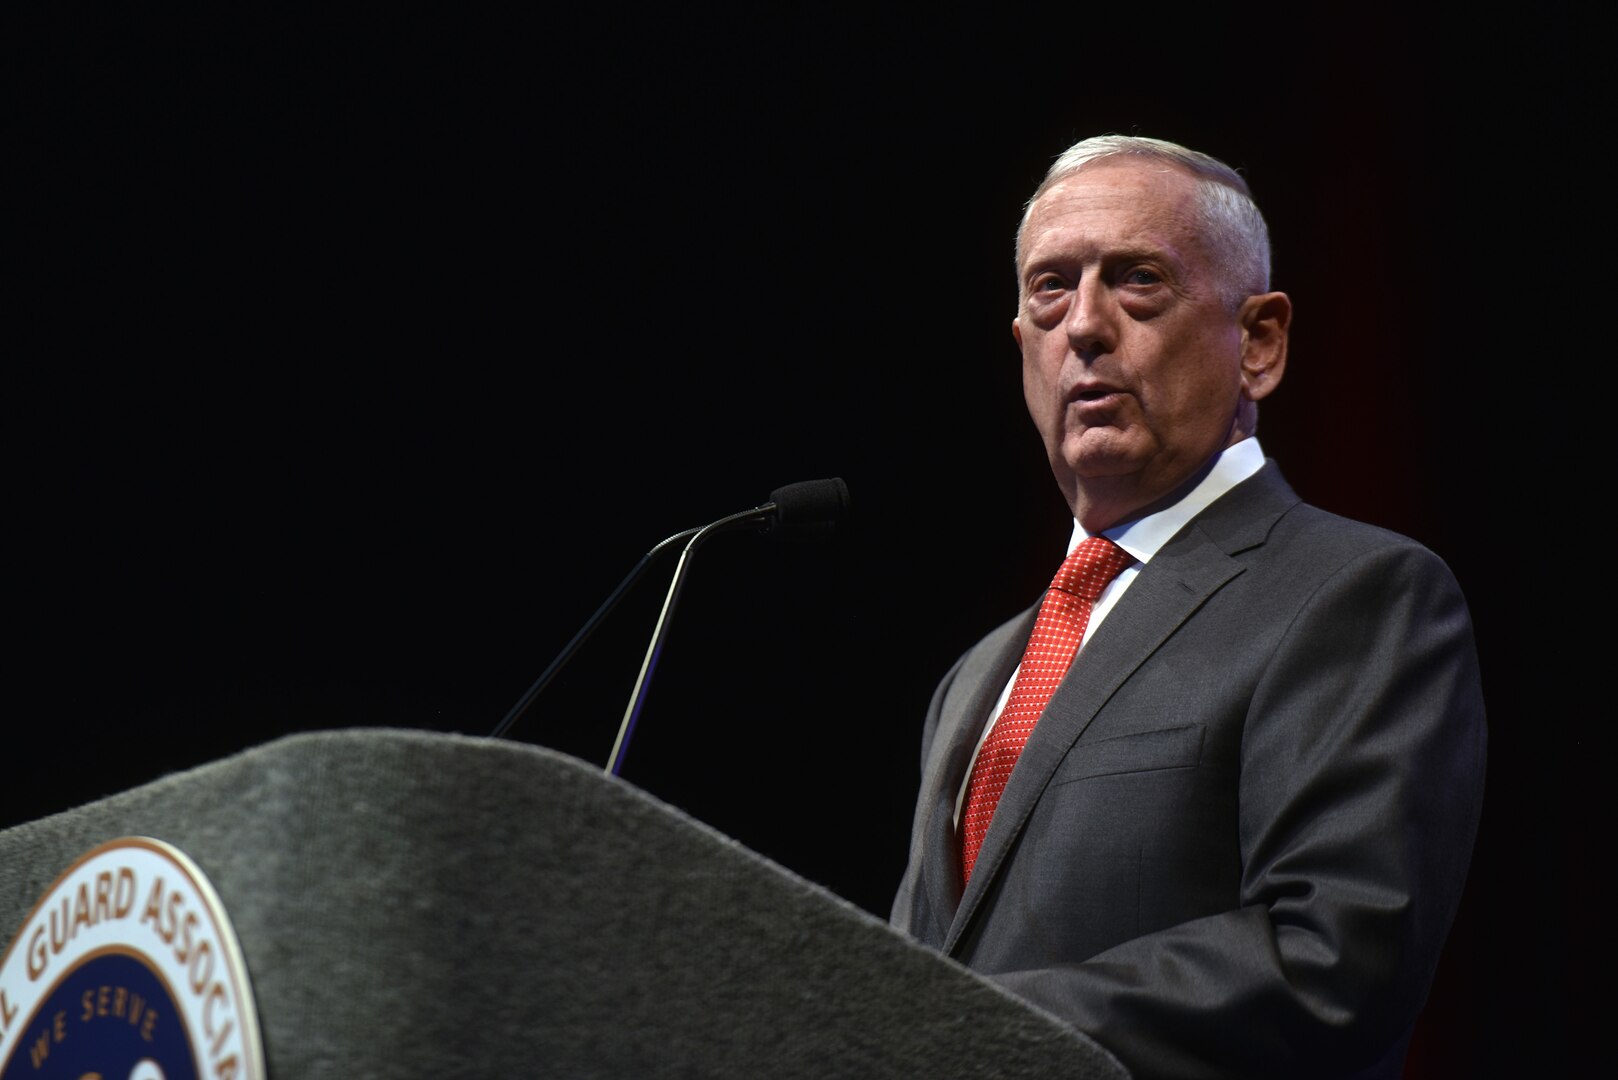 Secretary of Defense James Mattis addresses National Guard leaders at the National Guard Association of the United States 140th General Conference, New Orleans, Louisiana, Aug. 25.